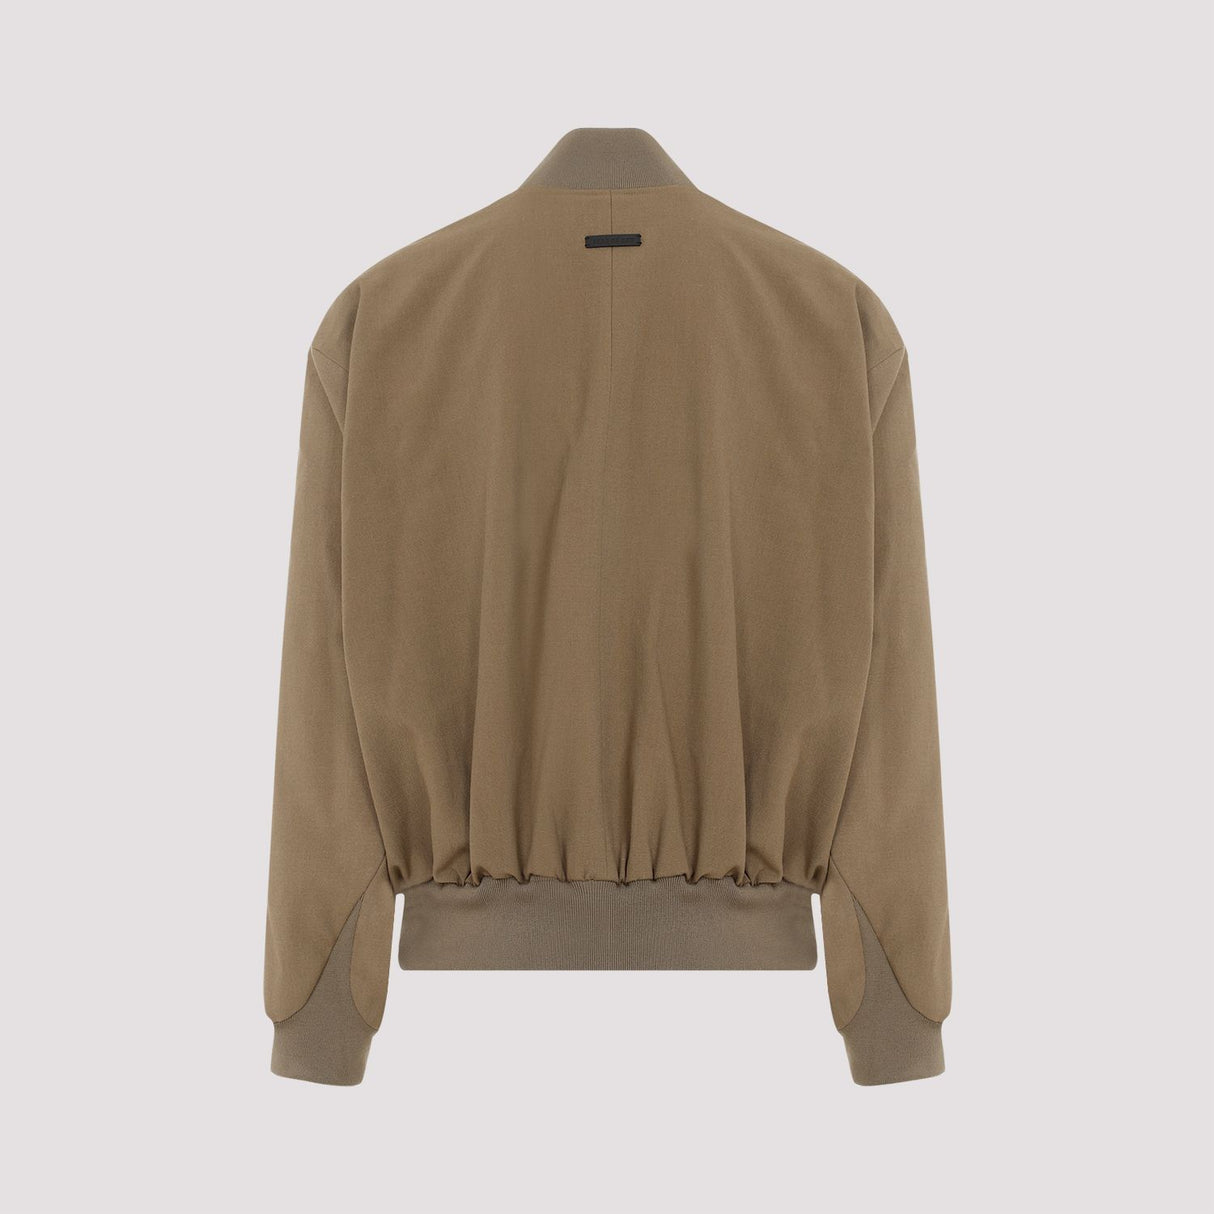 FEAR OF GOD Men's Brown Wool Jacket for SS24